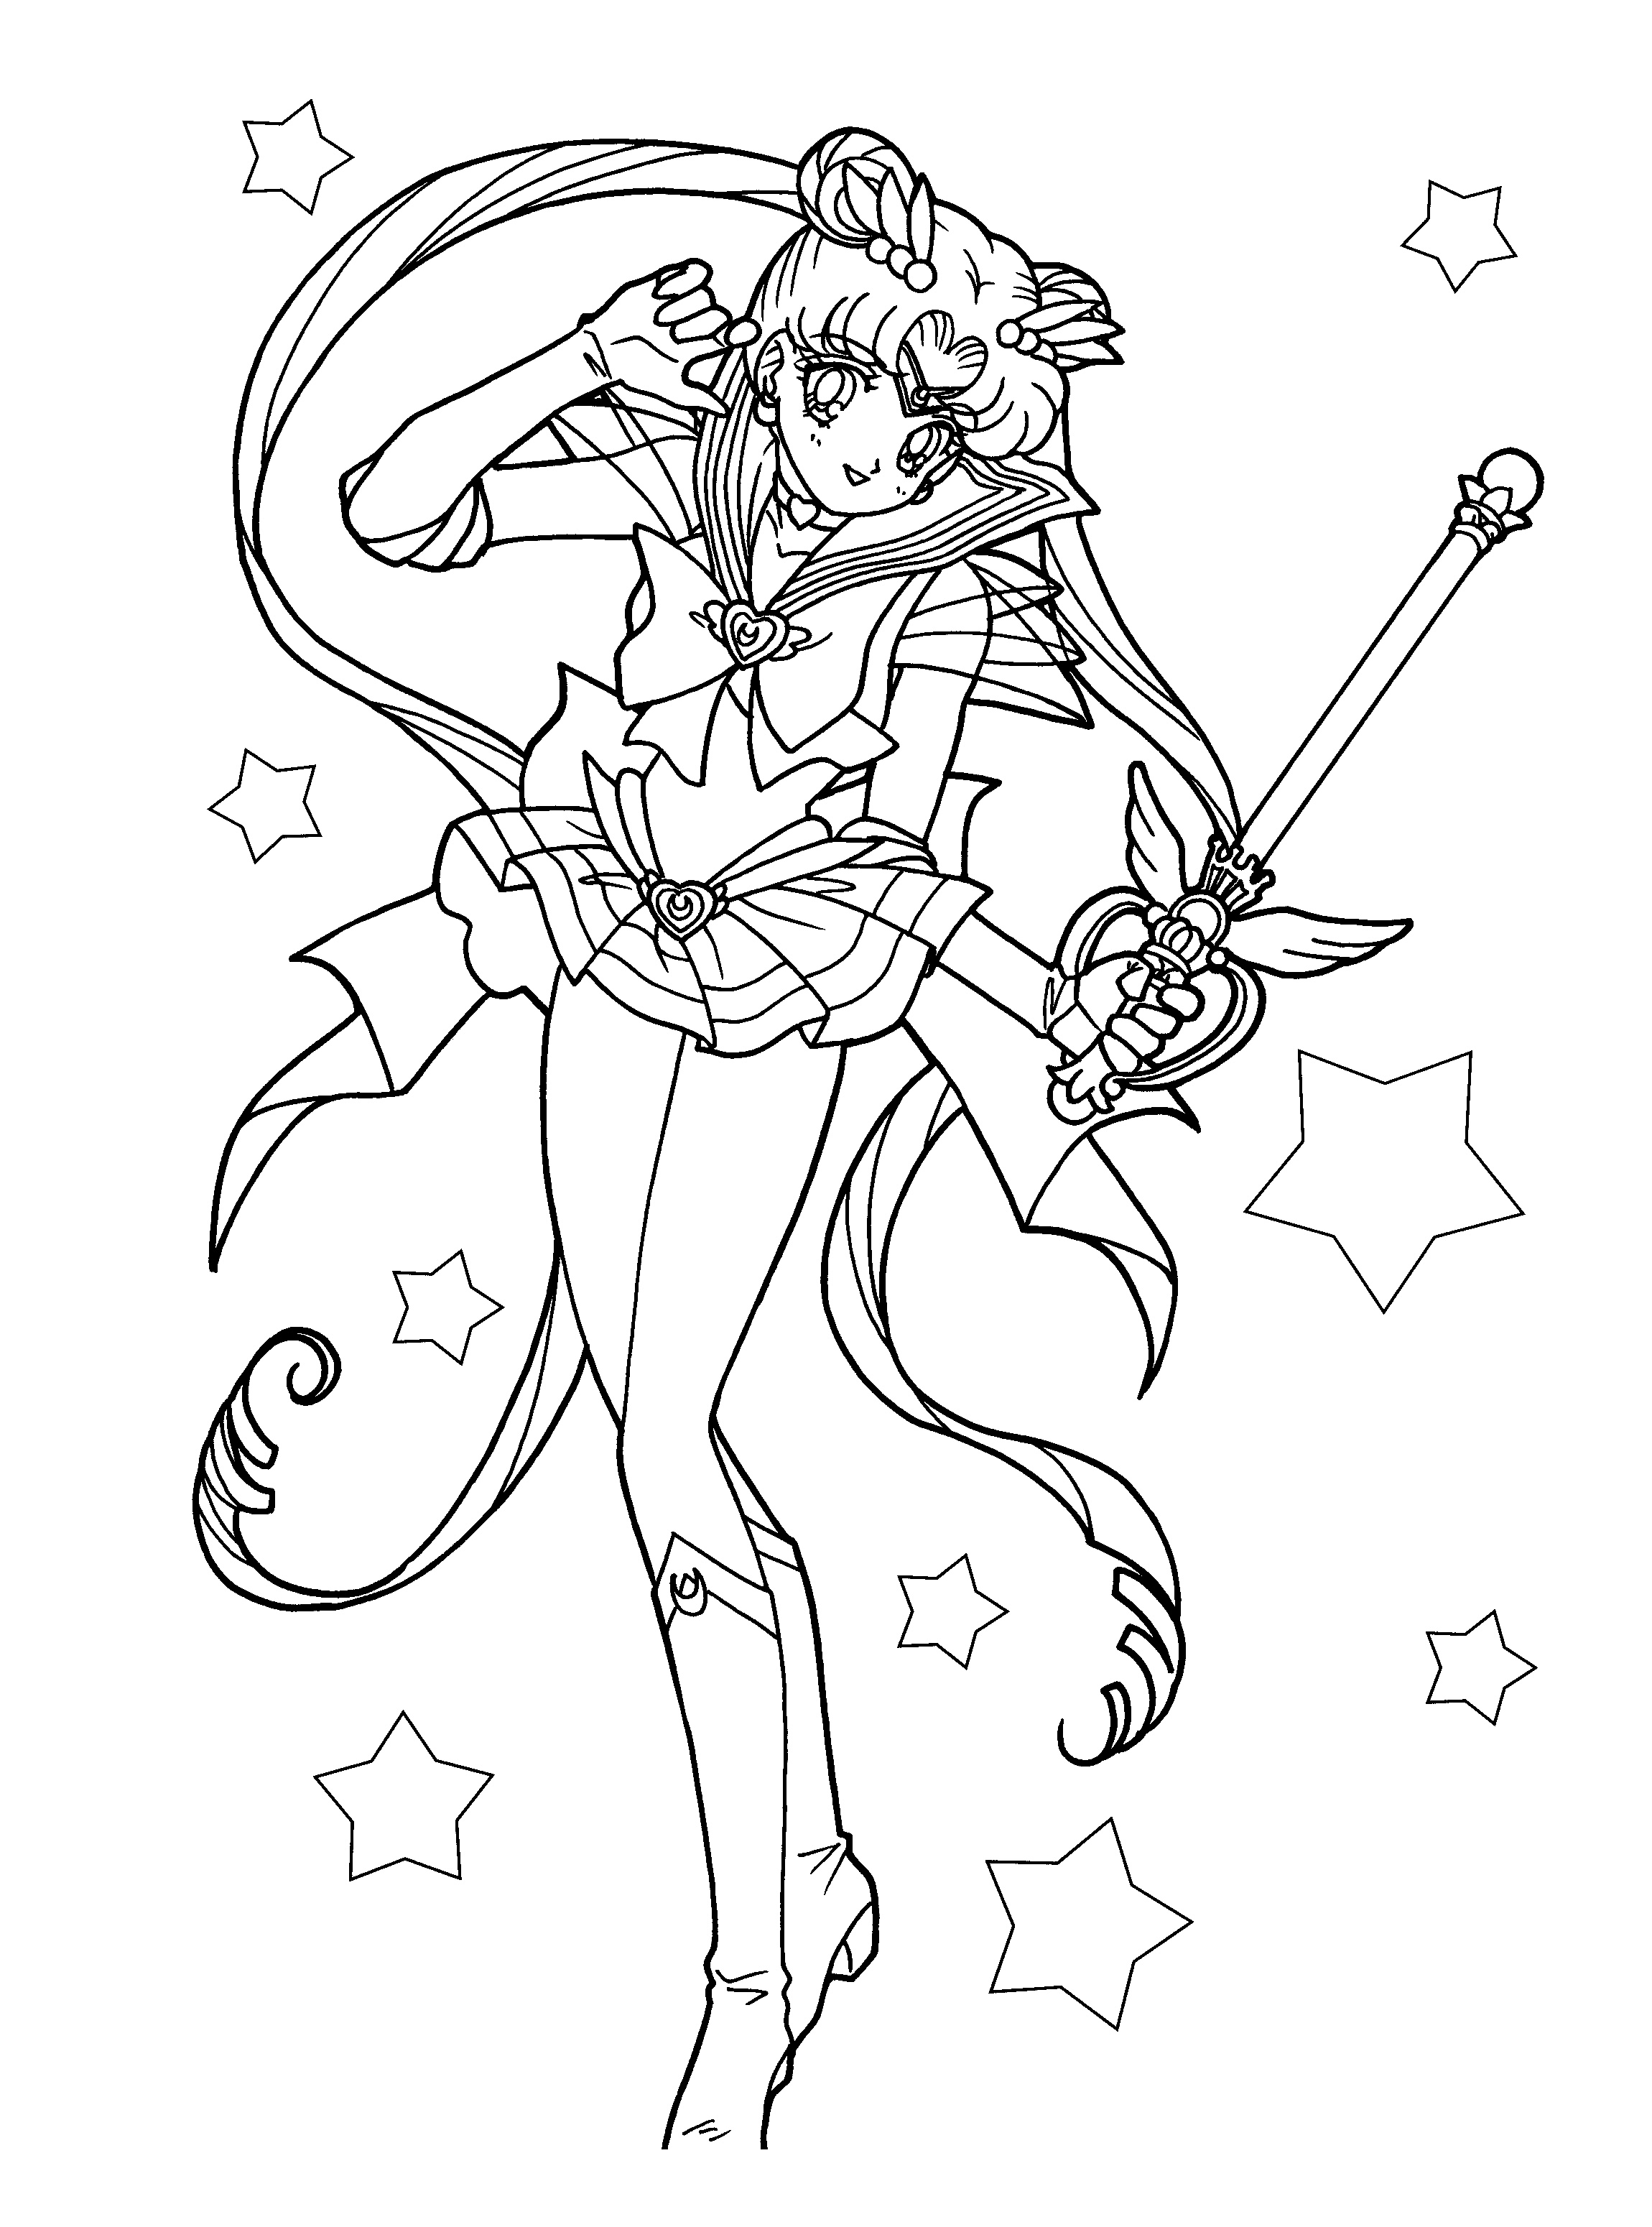 sailor-moon coloring page to print,printable,coloring pages